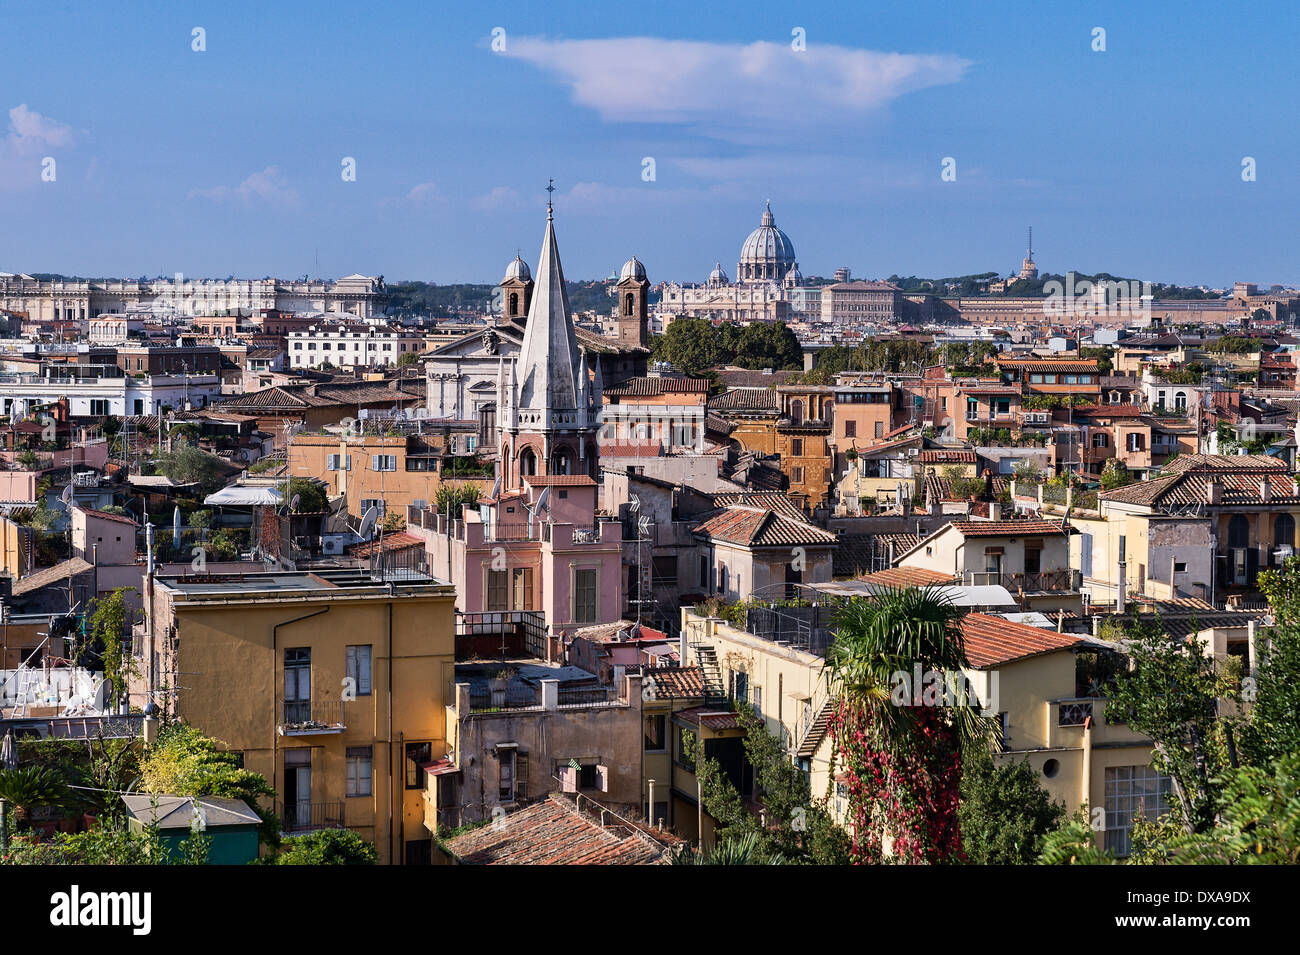 City view of central Rome, Italy. Stock Photo